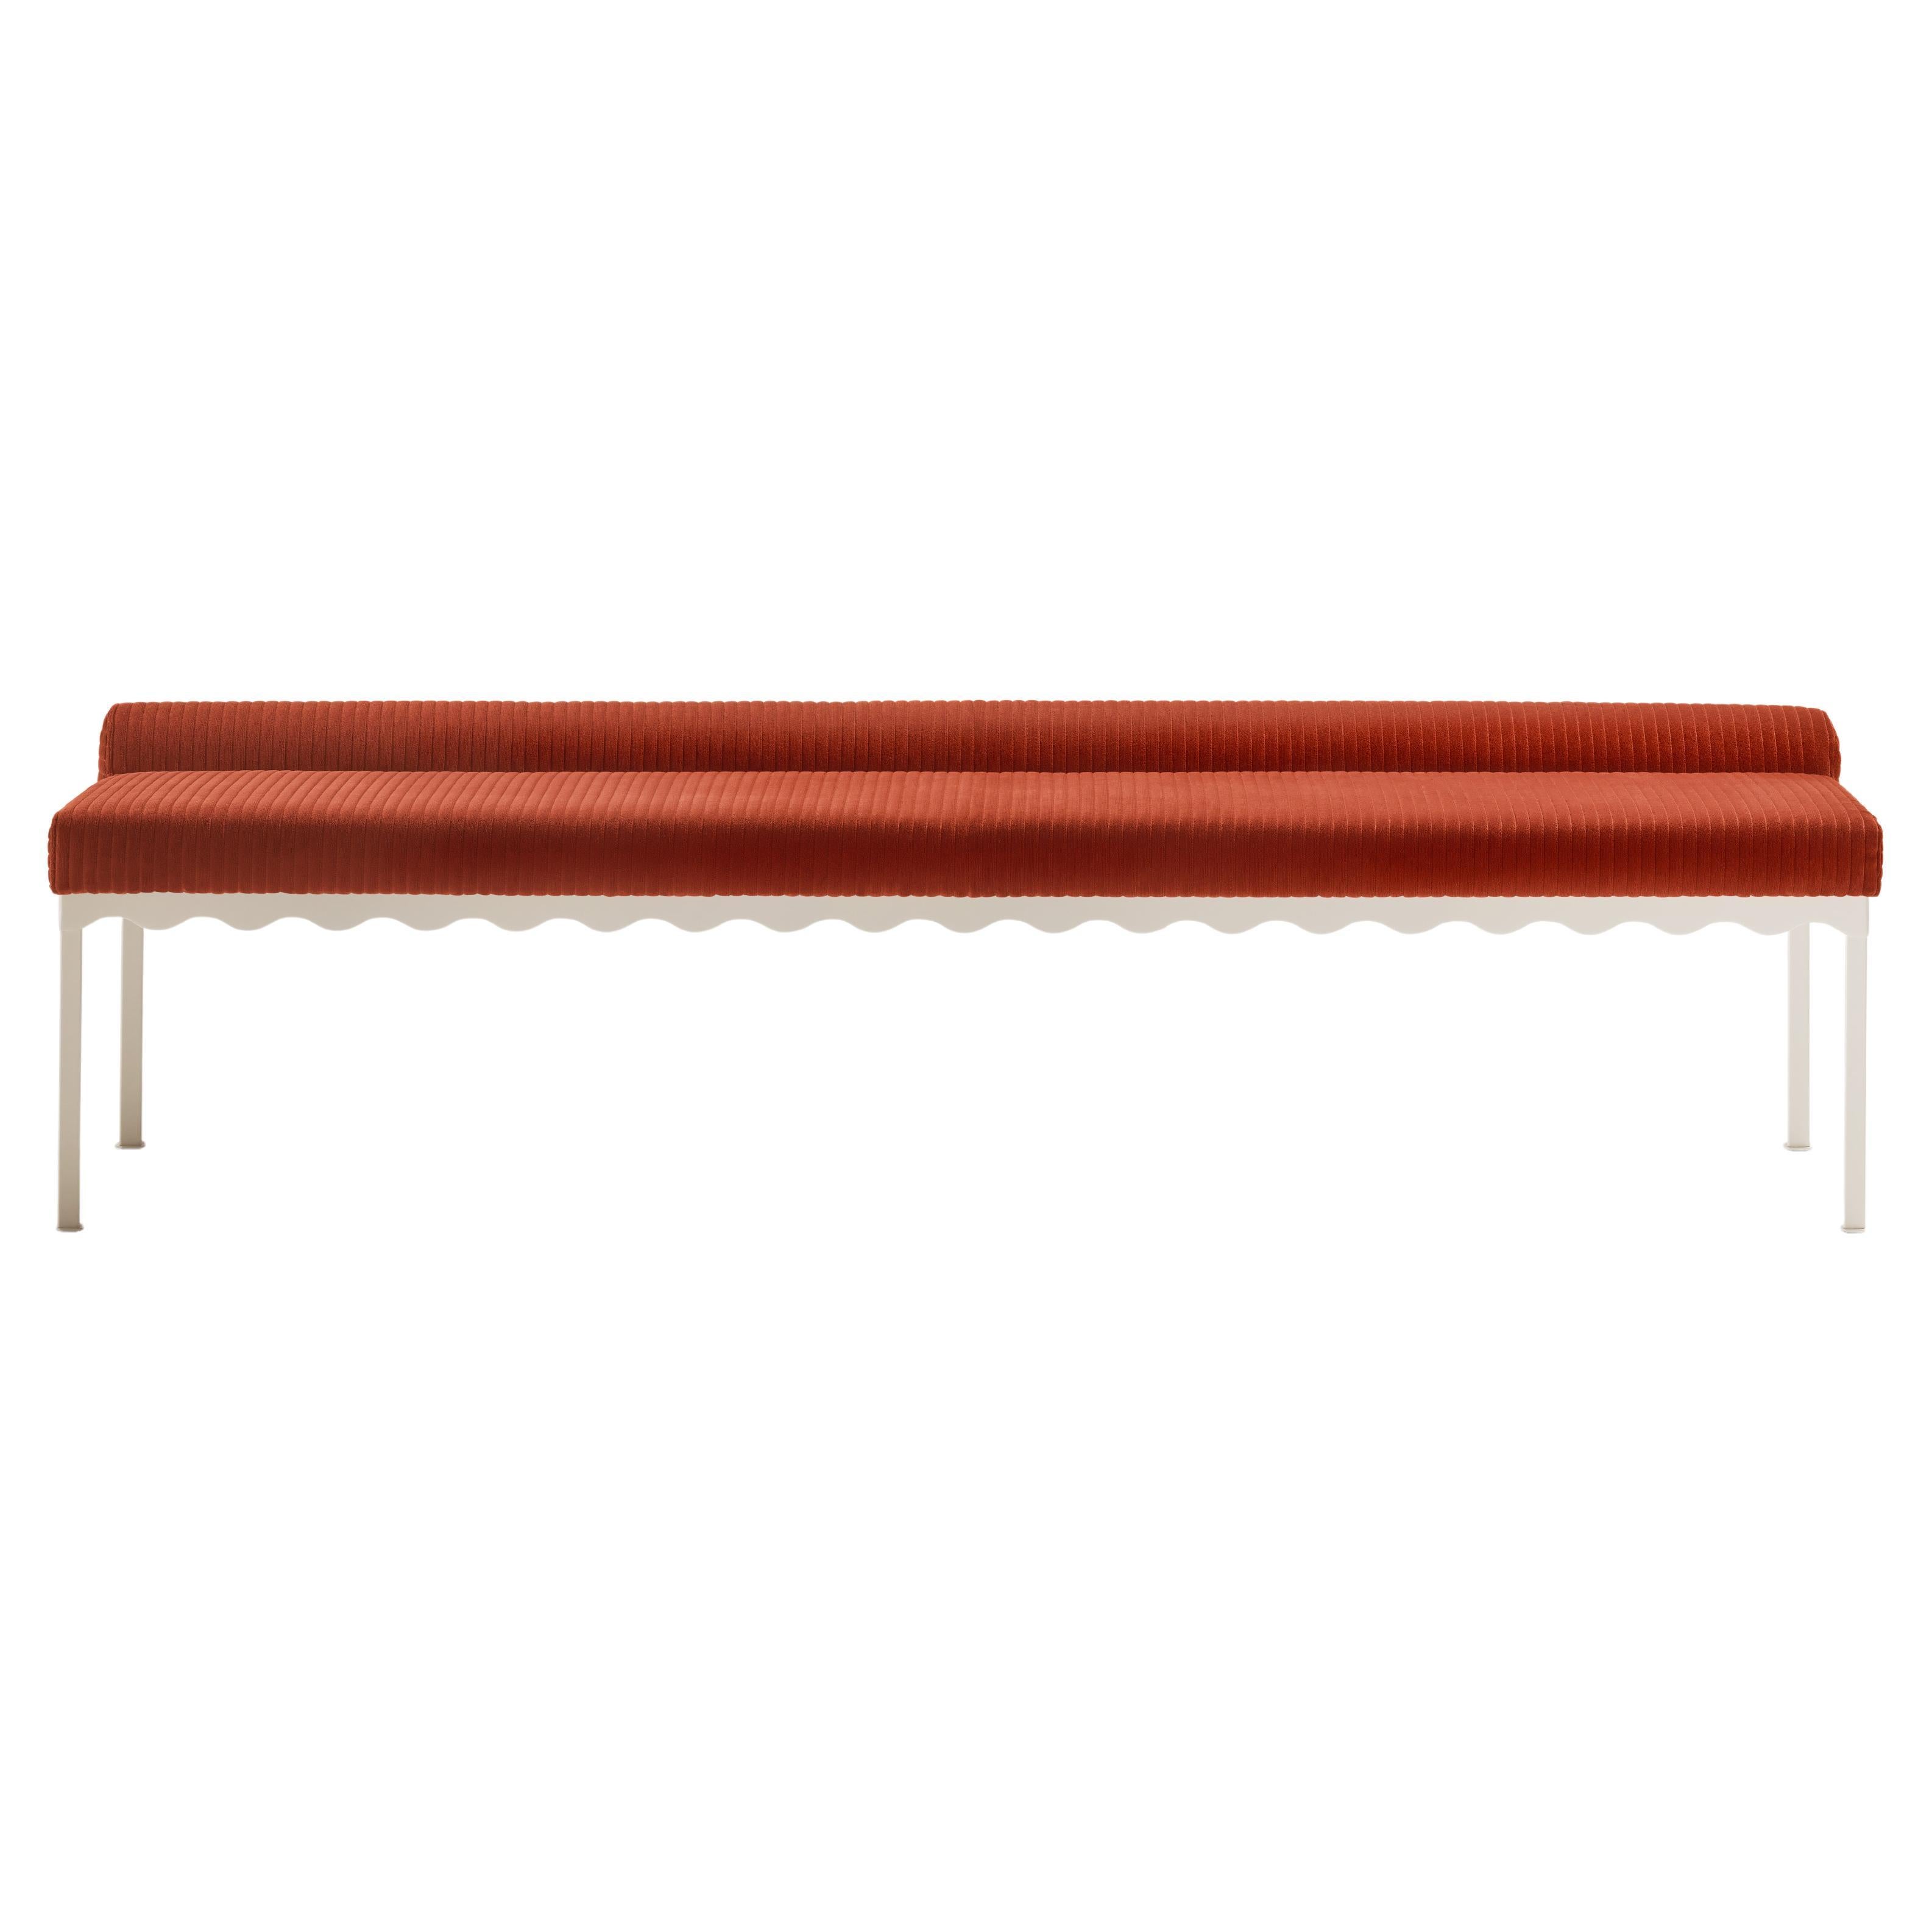 Sanguine Bellini 2040 Bench by Coco Flip For Sale